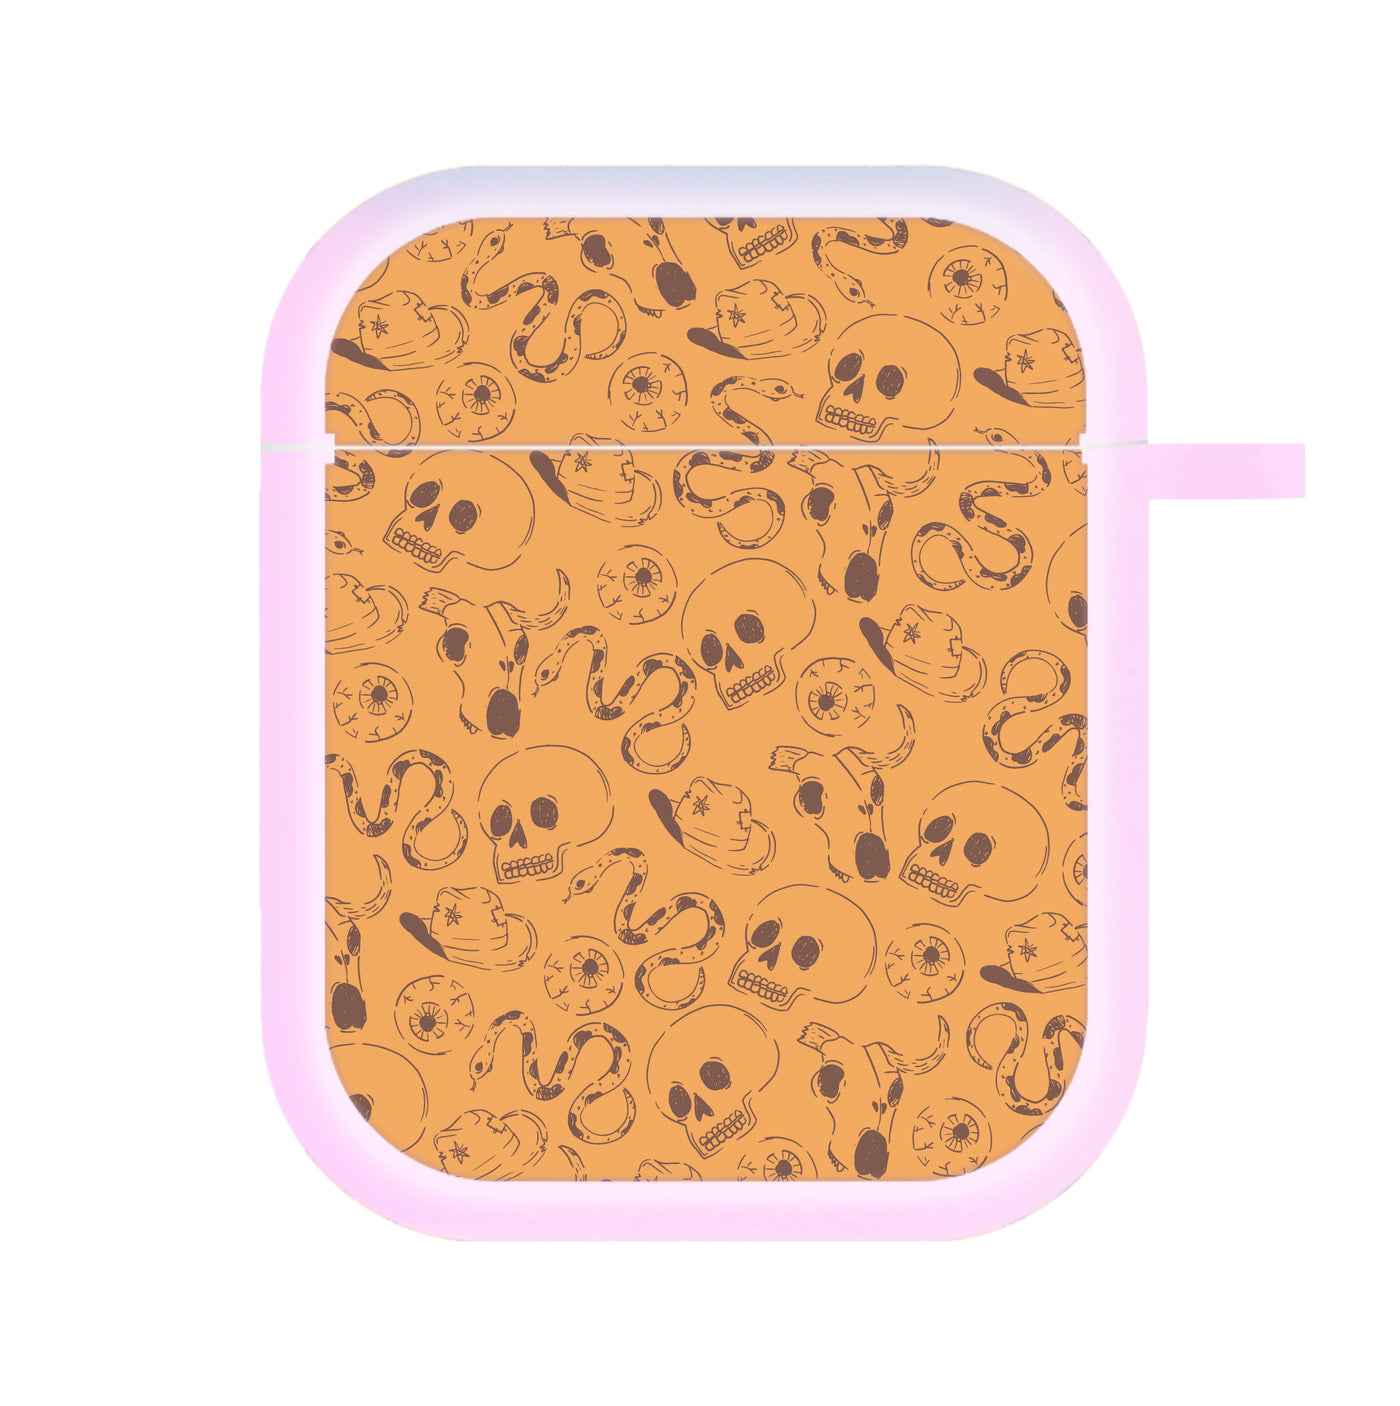 Orange Snakes And Skulls - Western  AirPods Case